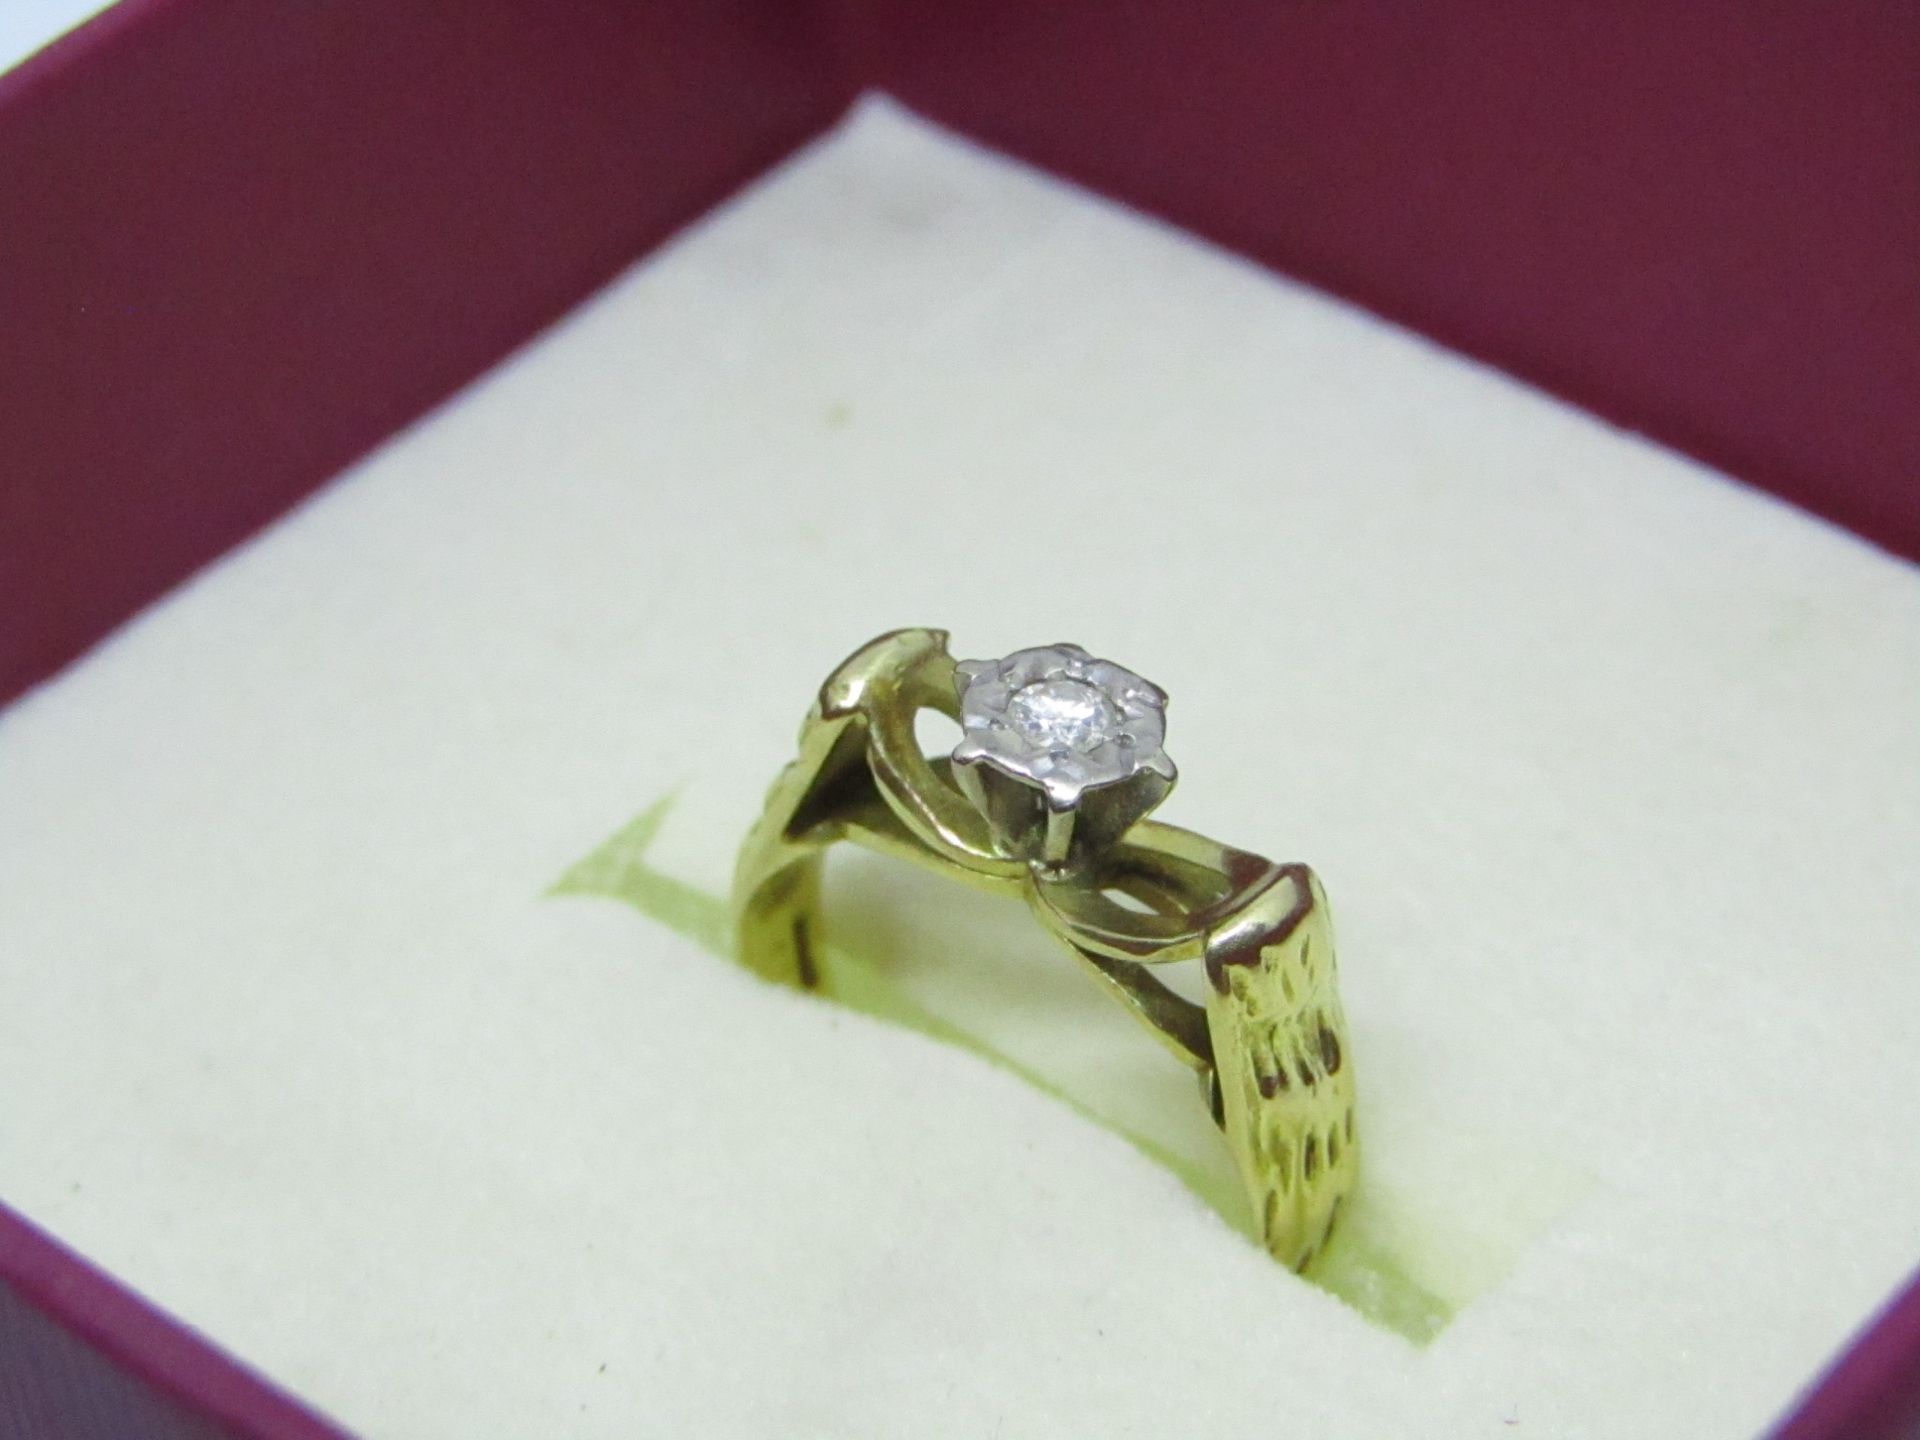 NO VAT!! Pre-owned 9ct Gold Diamond Engagement Ring in presentation box (item has been cleaned